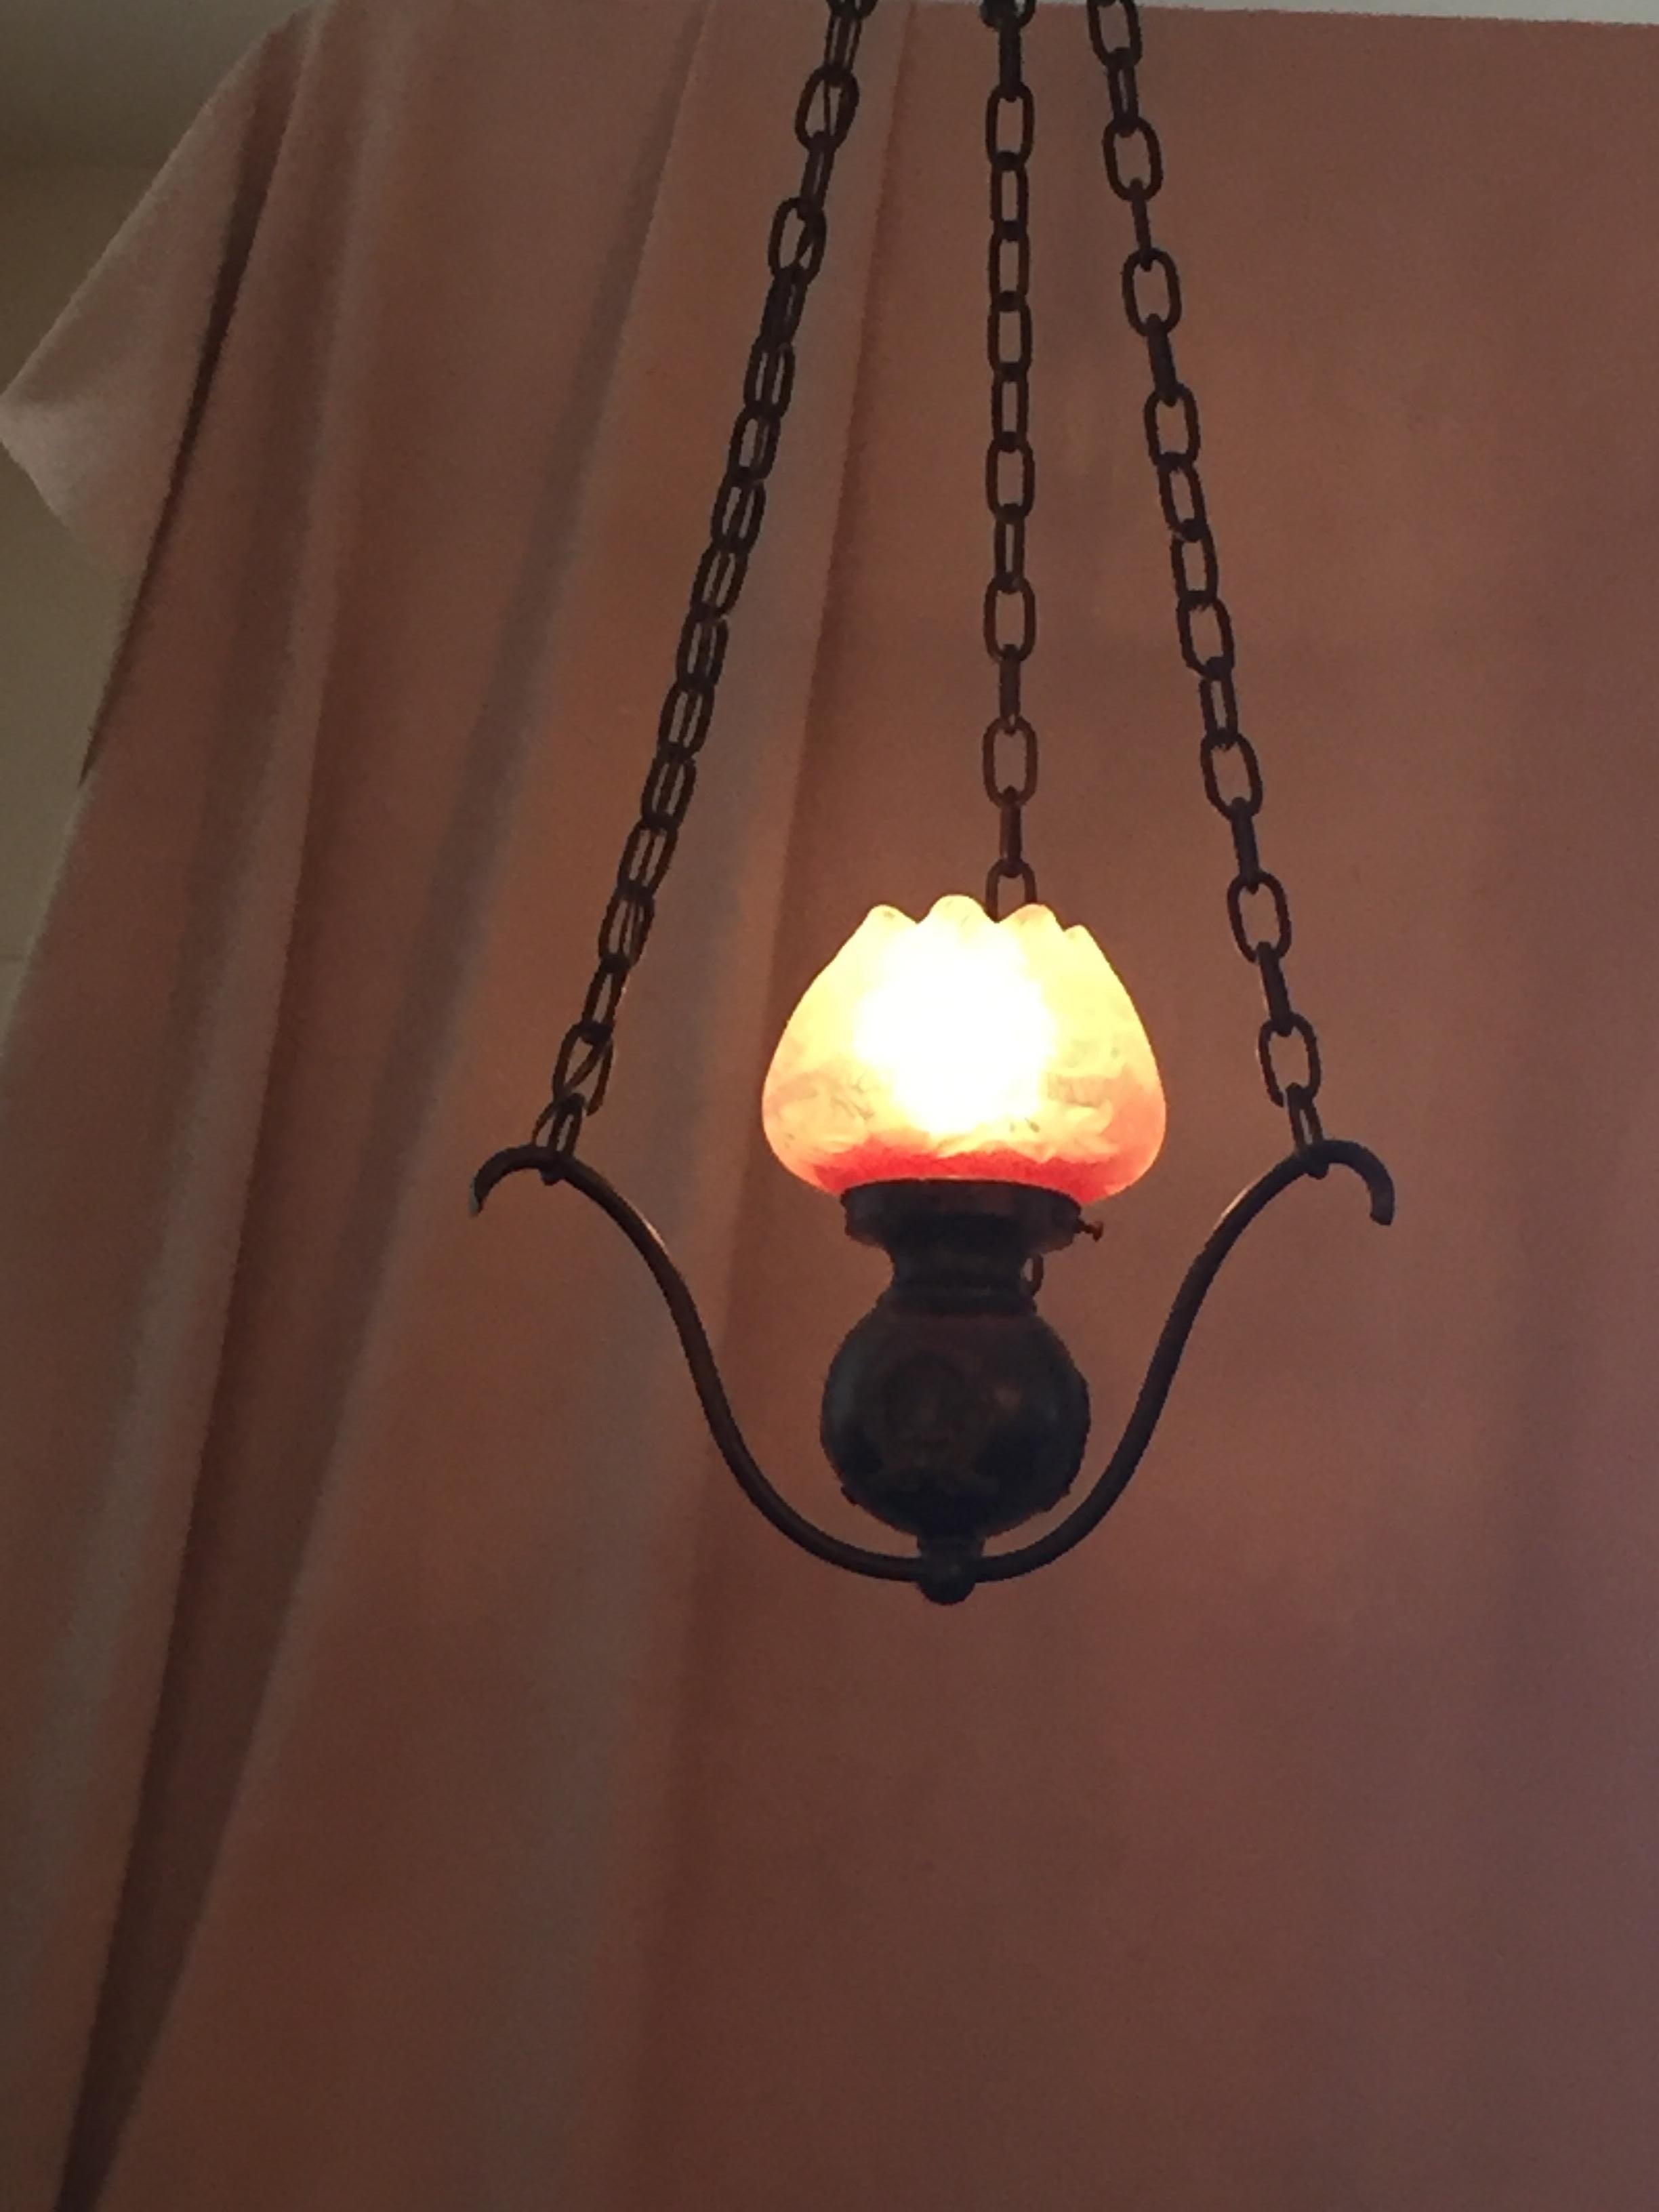 This sweet little pendant is perfect for a hallway entrance or any other small area you need a chandelier. The glass is deep etched and has a cranberry accent. Warm patina and that glass really make a wonderful little light for the home. The glass